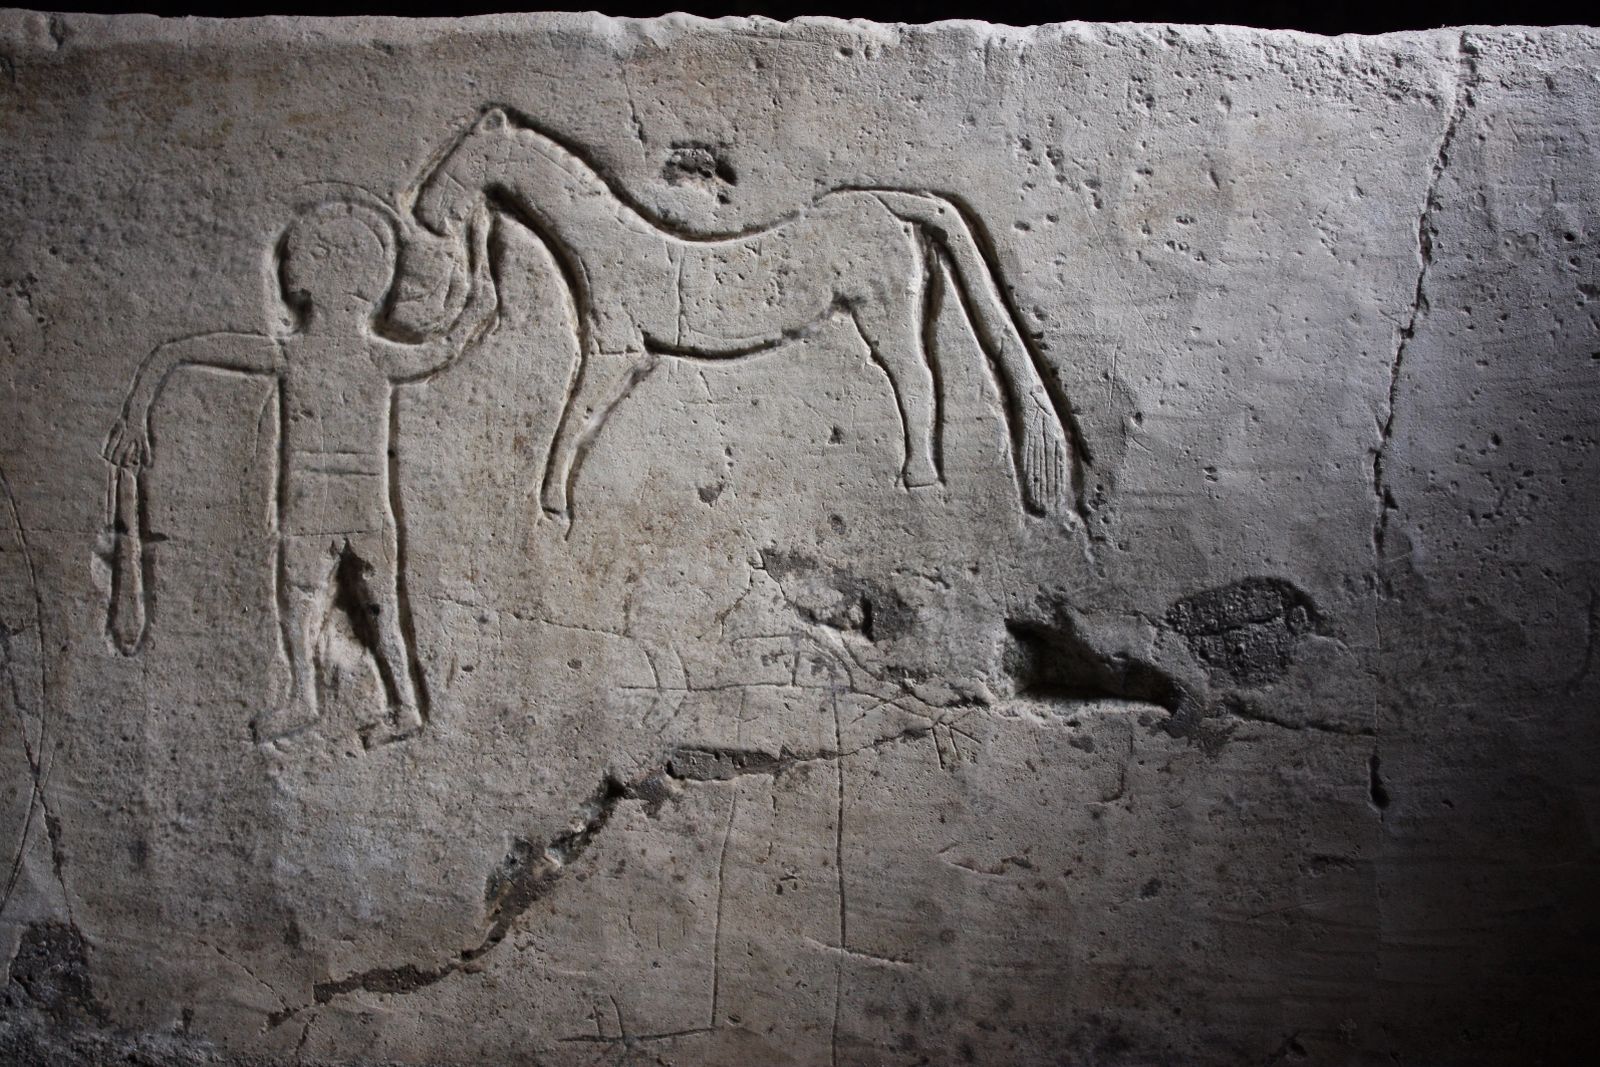 An ancient engraving inside Catacomb 1. Photo by Tsvika Tsuk/Israel Nature and Parks Authority